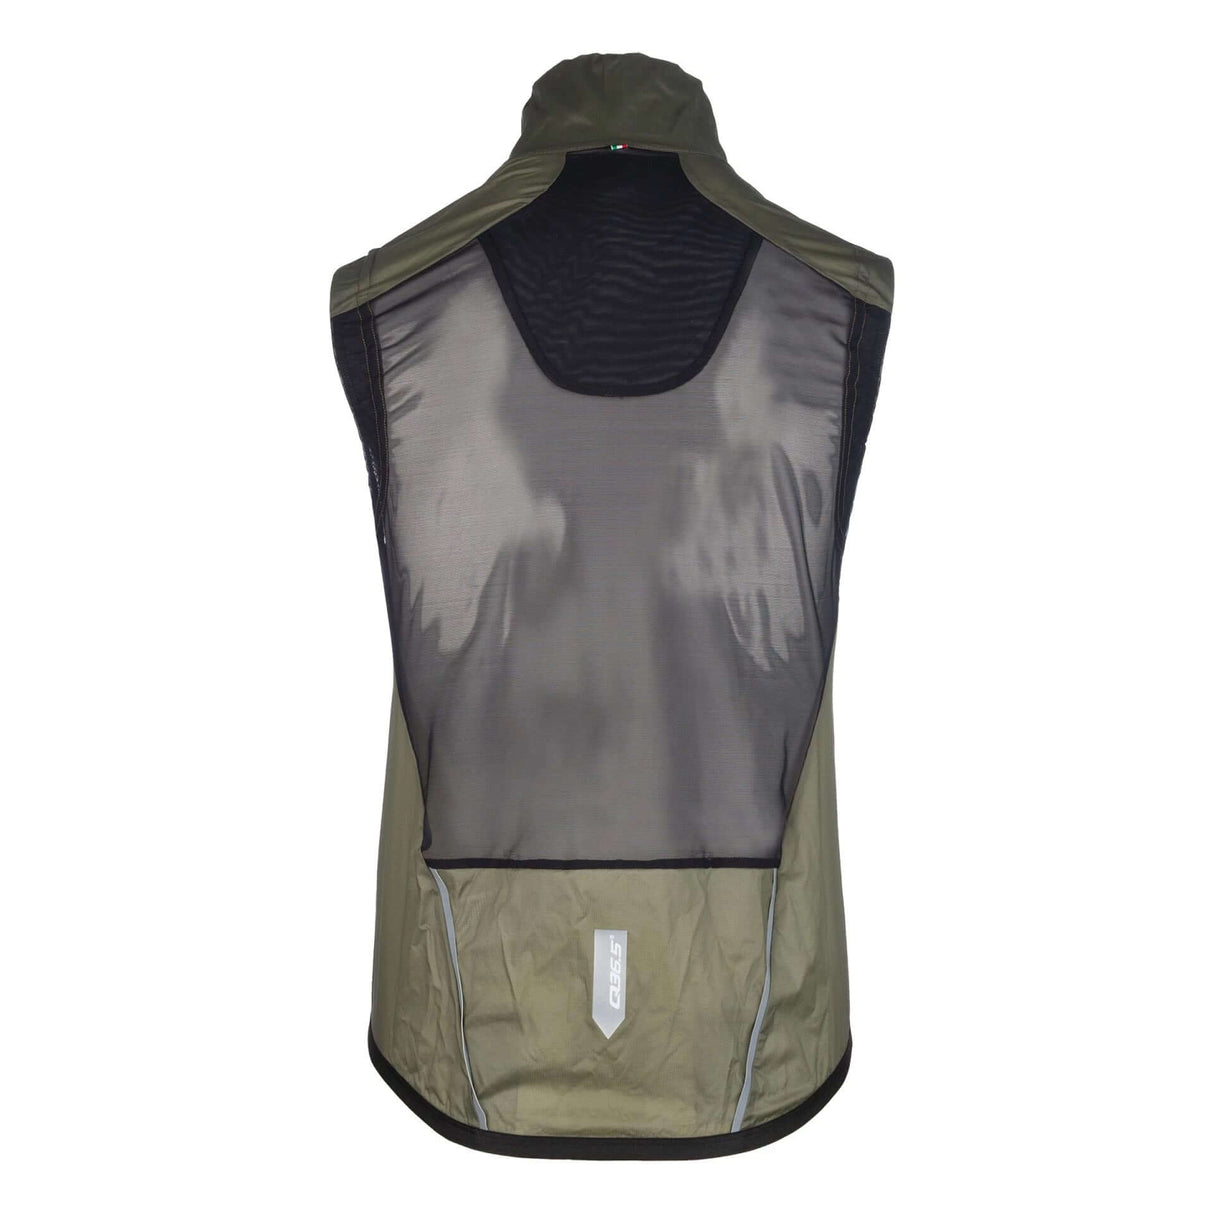 Q36.5 Air Vest | Strictly Bicycles